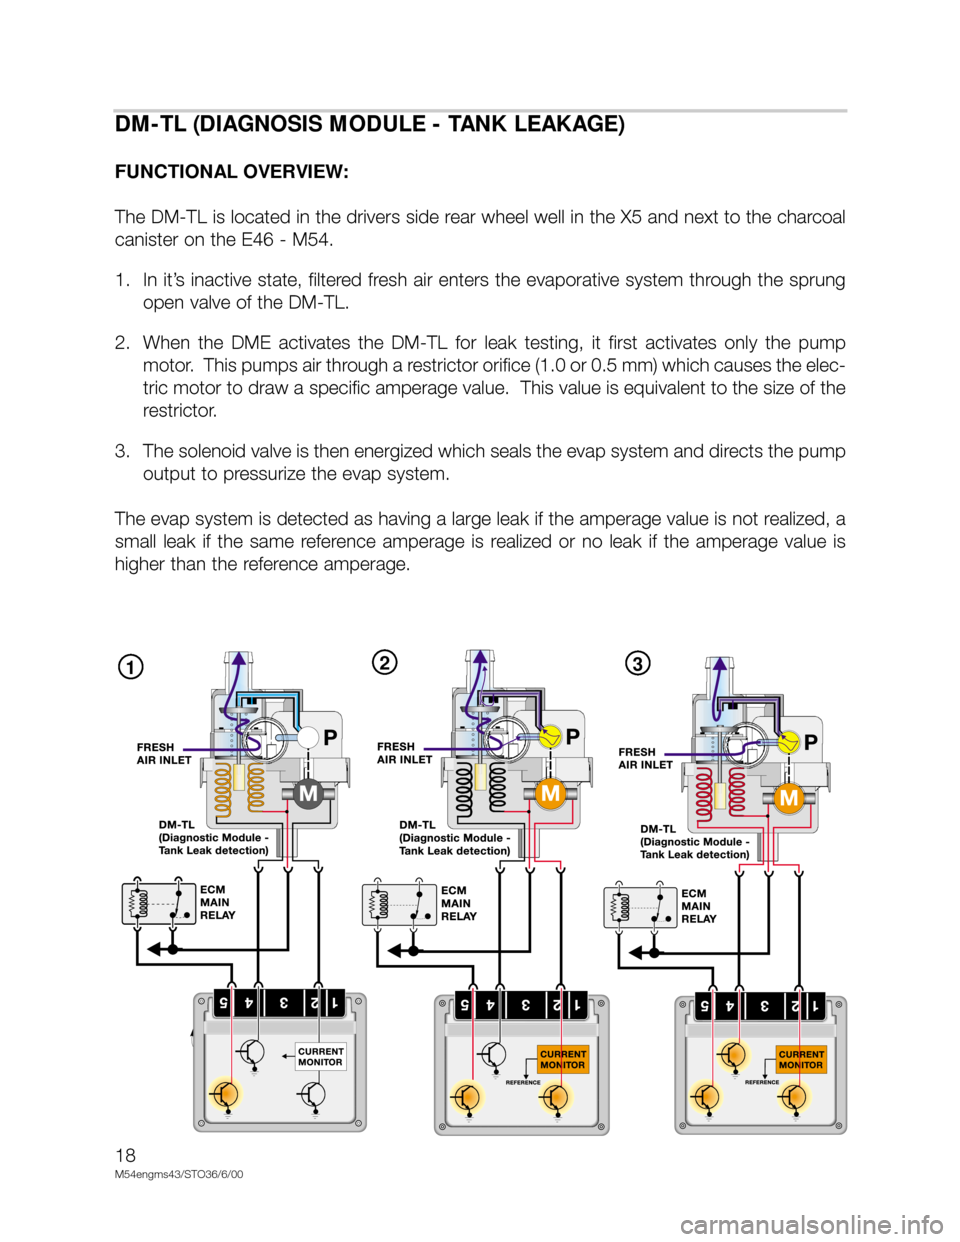 BMW X5 2002 E53 M54 Engine User Guide 18
M54engms43/STO36/6/00
123
DM-TL (DIAGNOSIS MODULE - TANK LEAKAGE)
FUNCTIONAL OVERVIEW:
The DM-TL is located in the drivers side rear wheel well in the X5 and next to the charcoal
canister on the E4